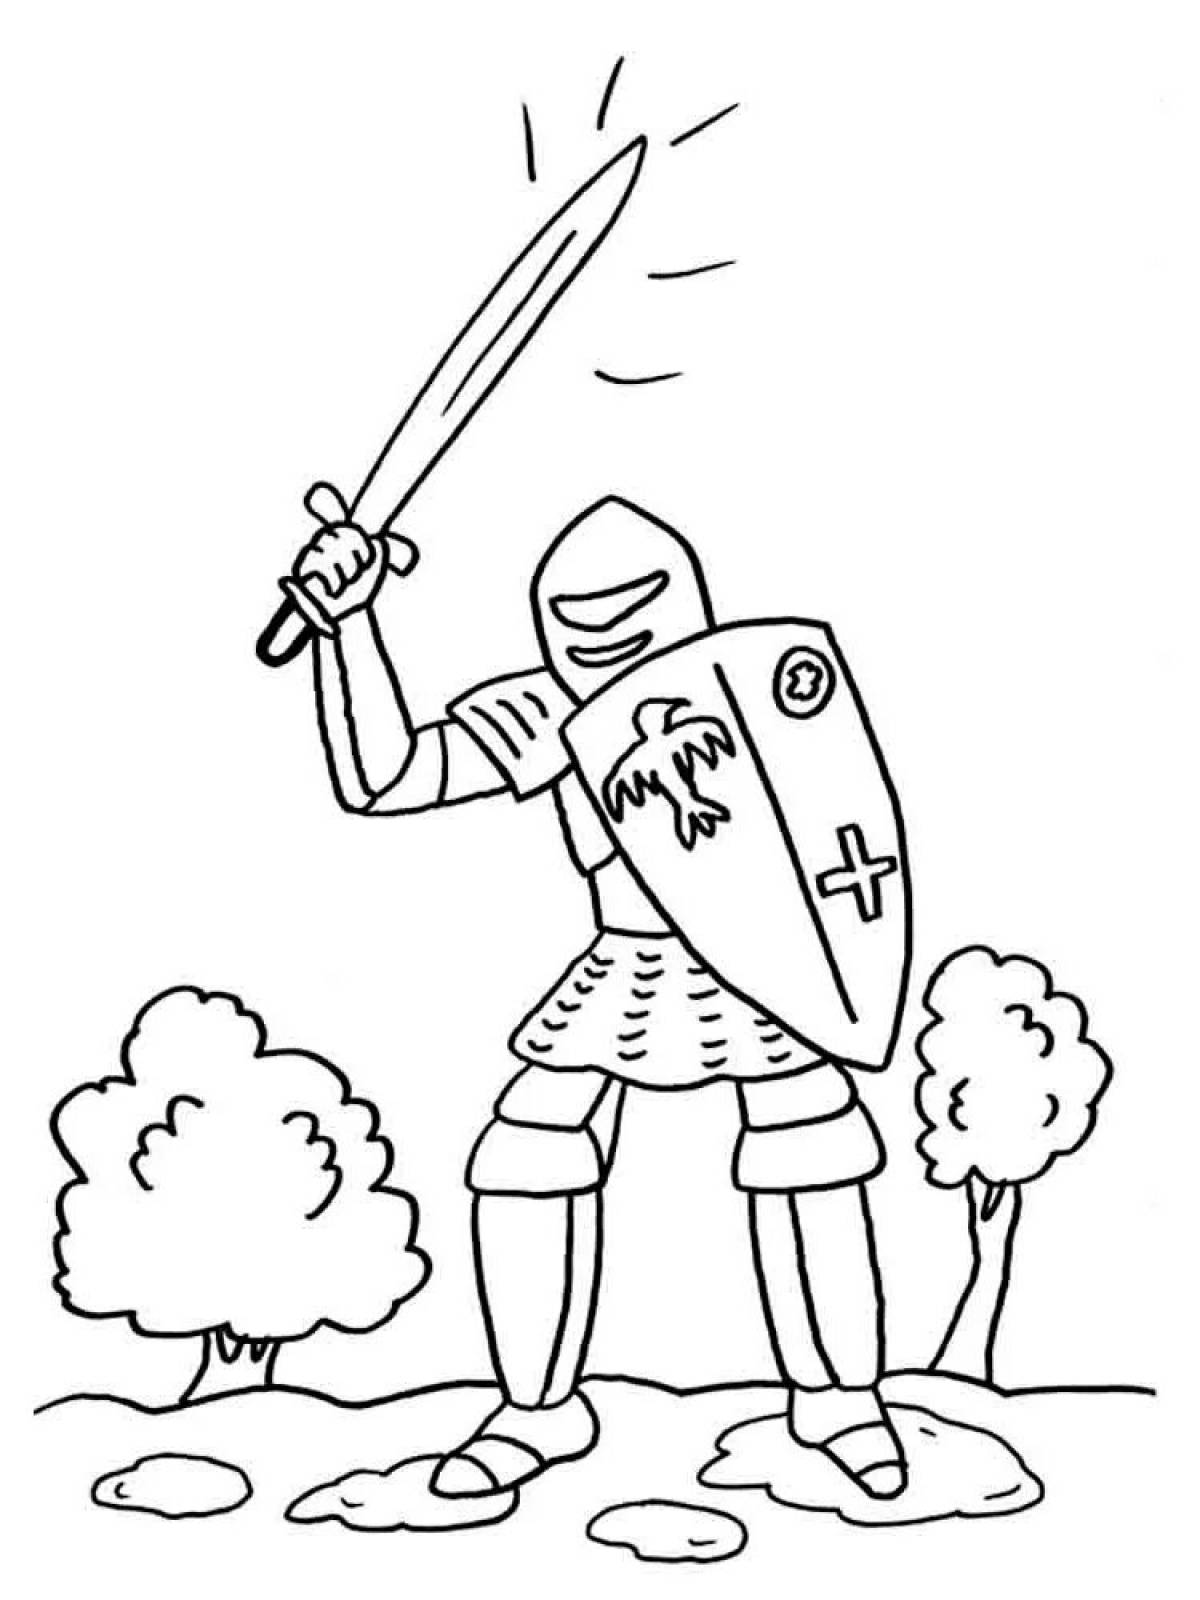 Knight for kids #8